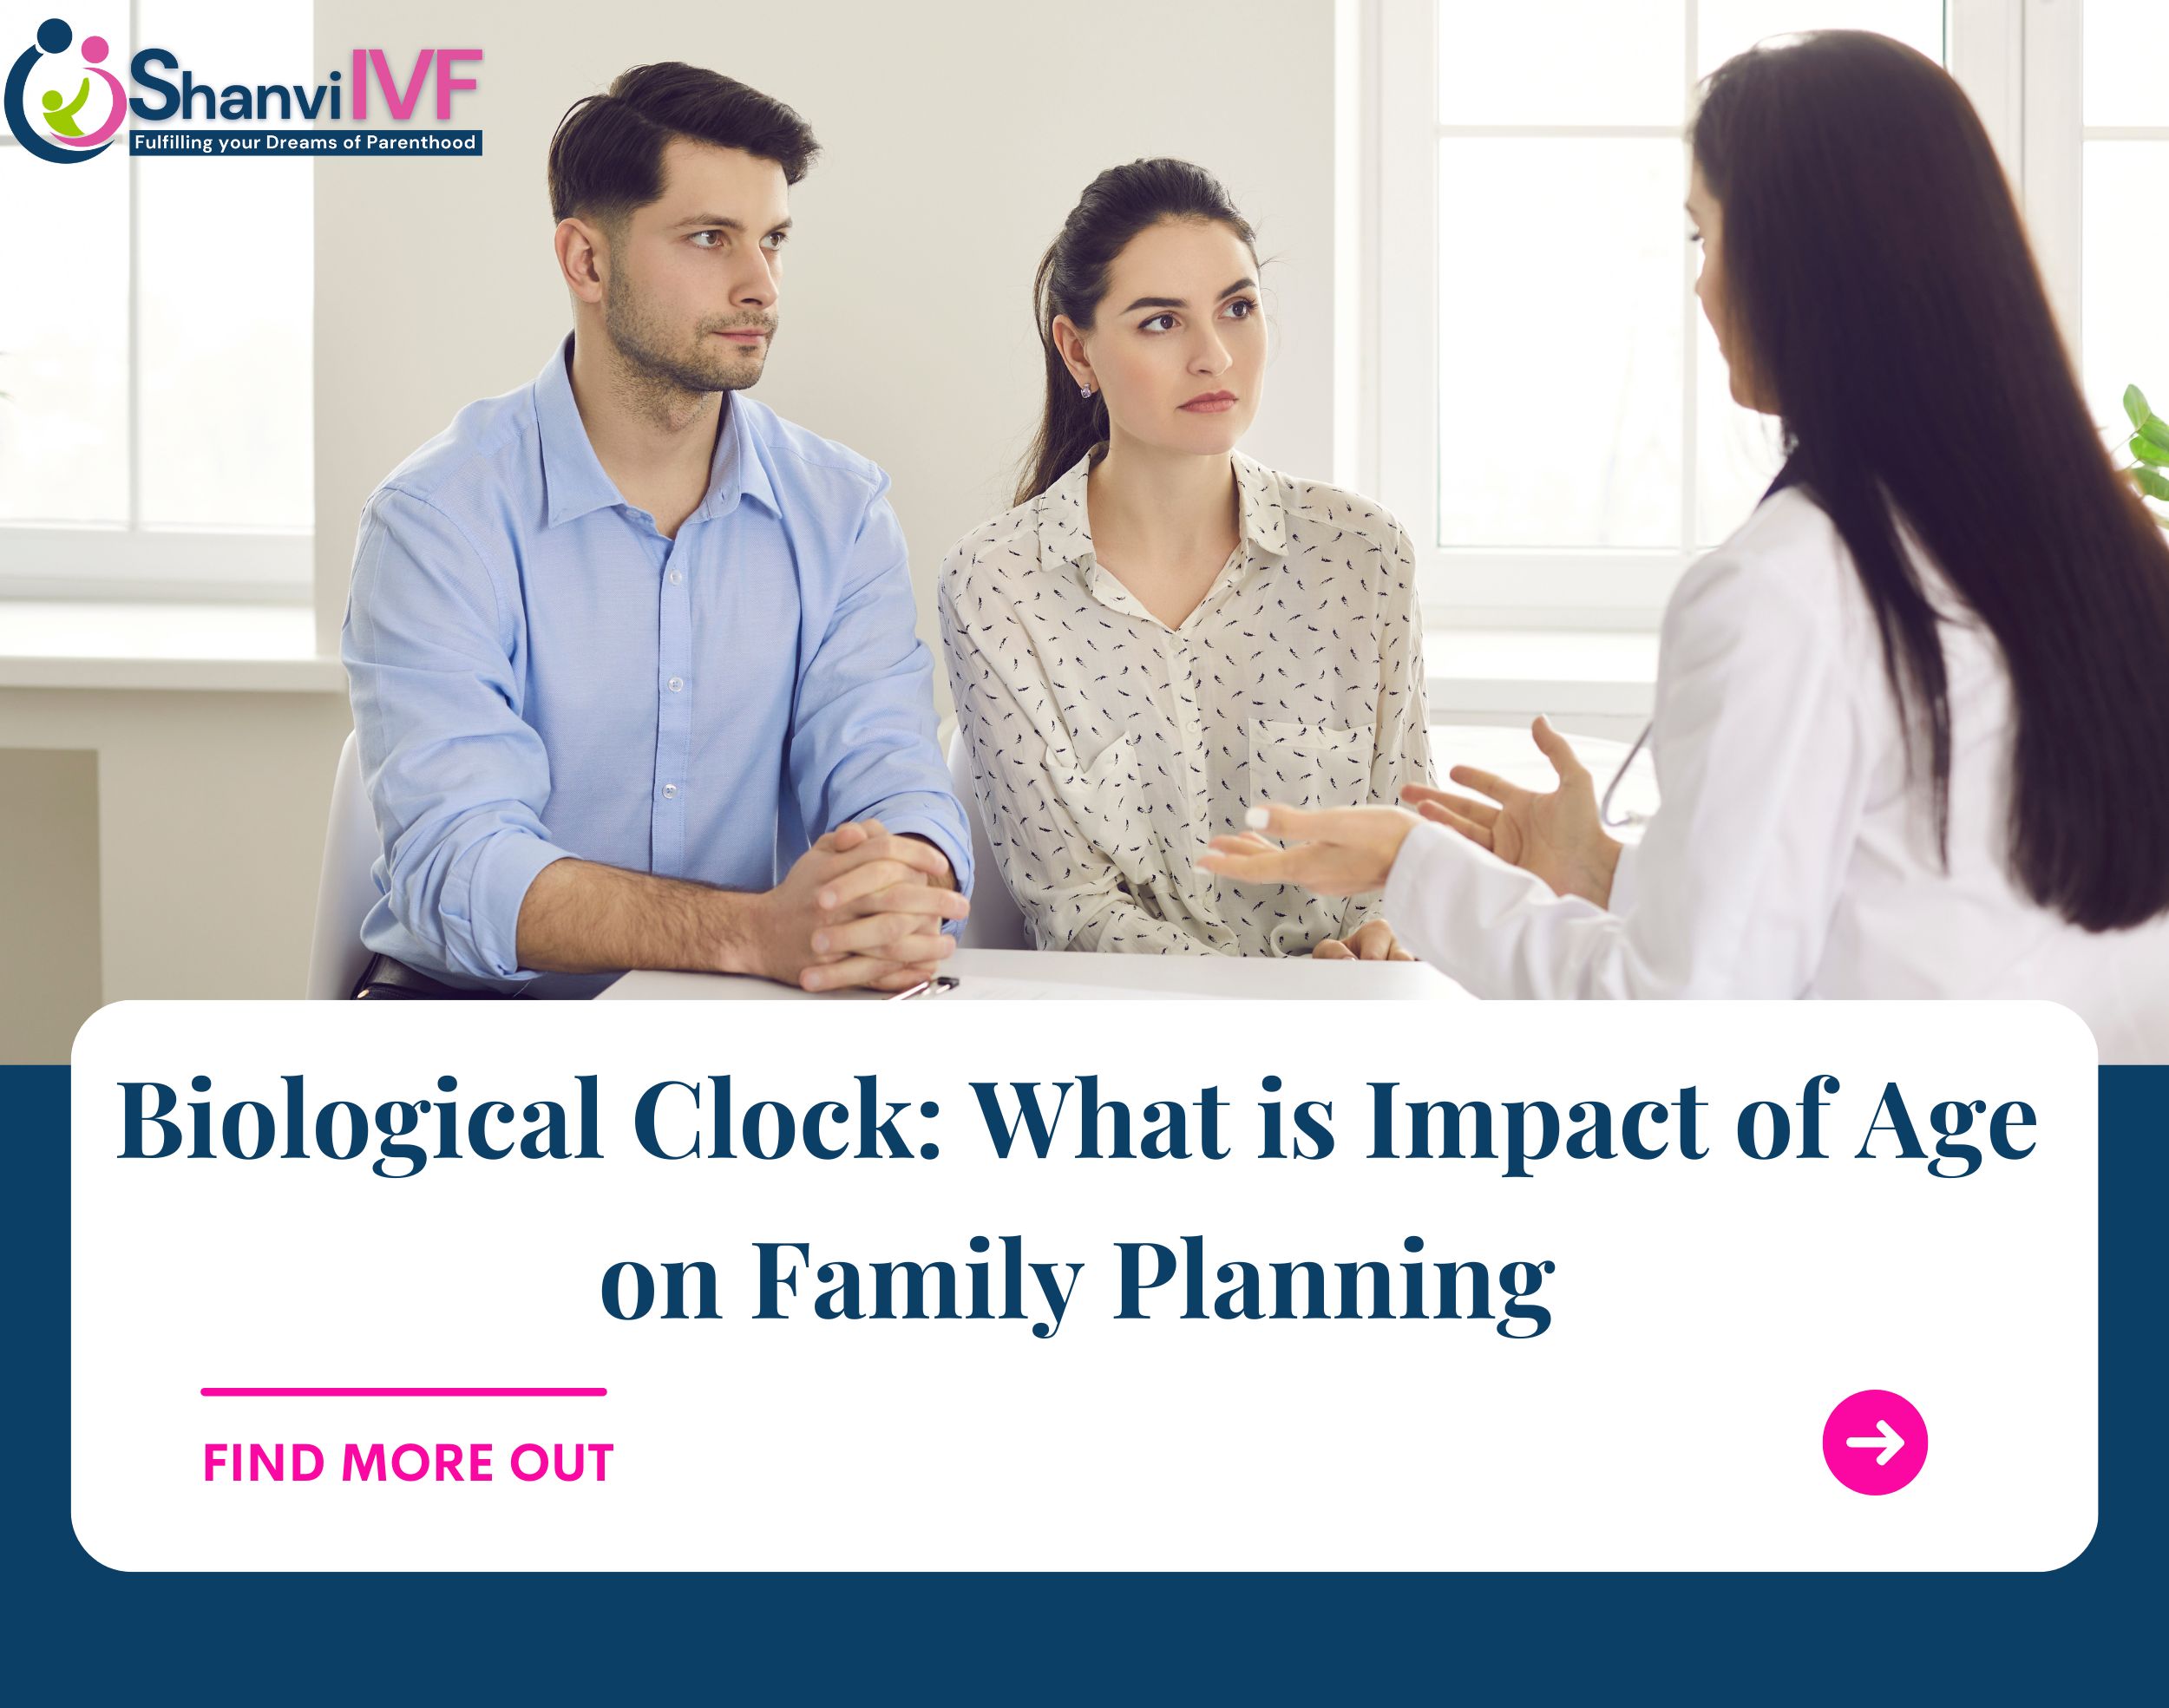 Biological Clock: What is Impact of Age on Family Planning